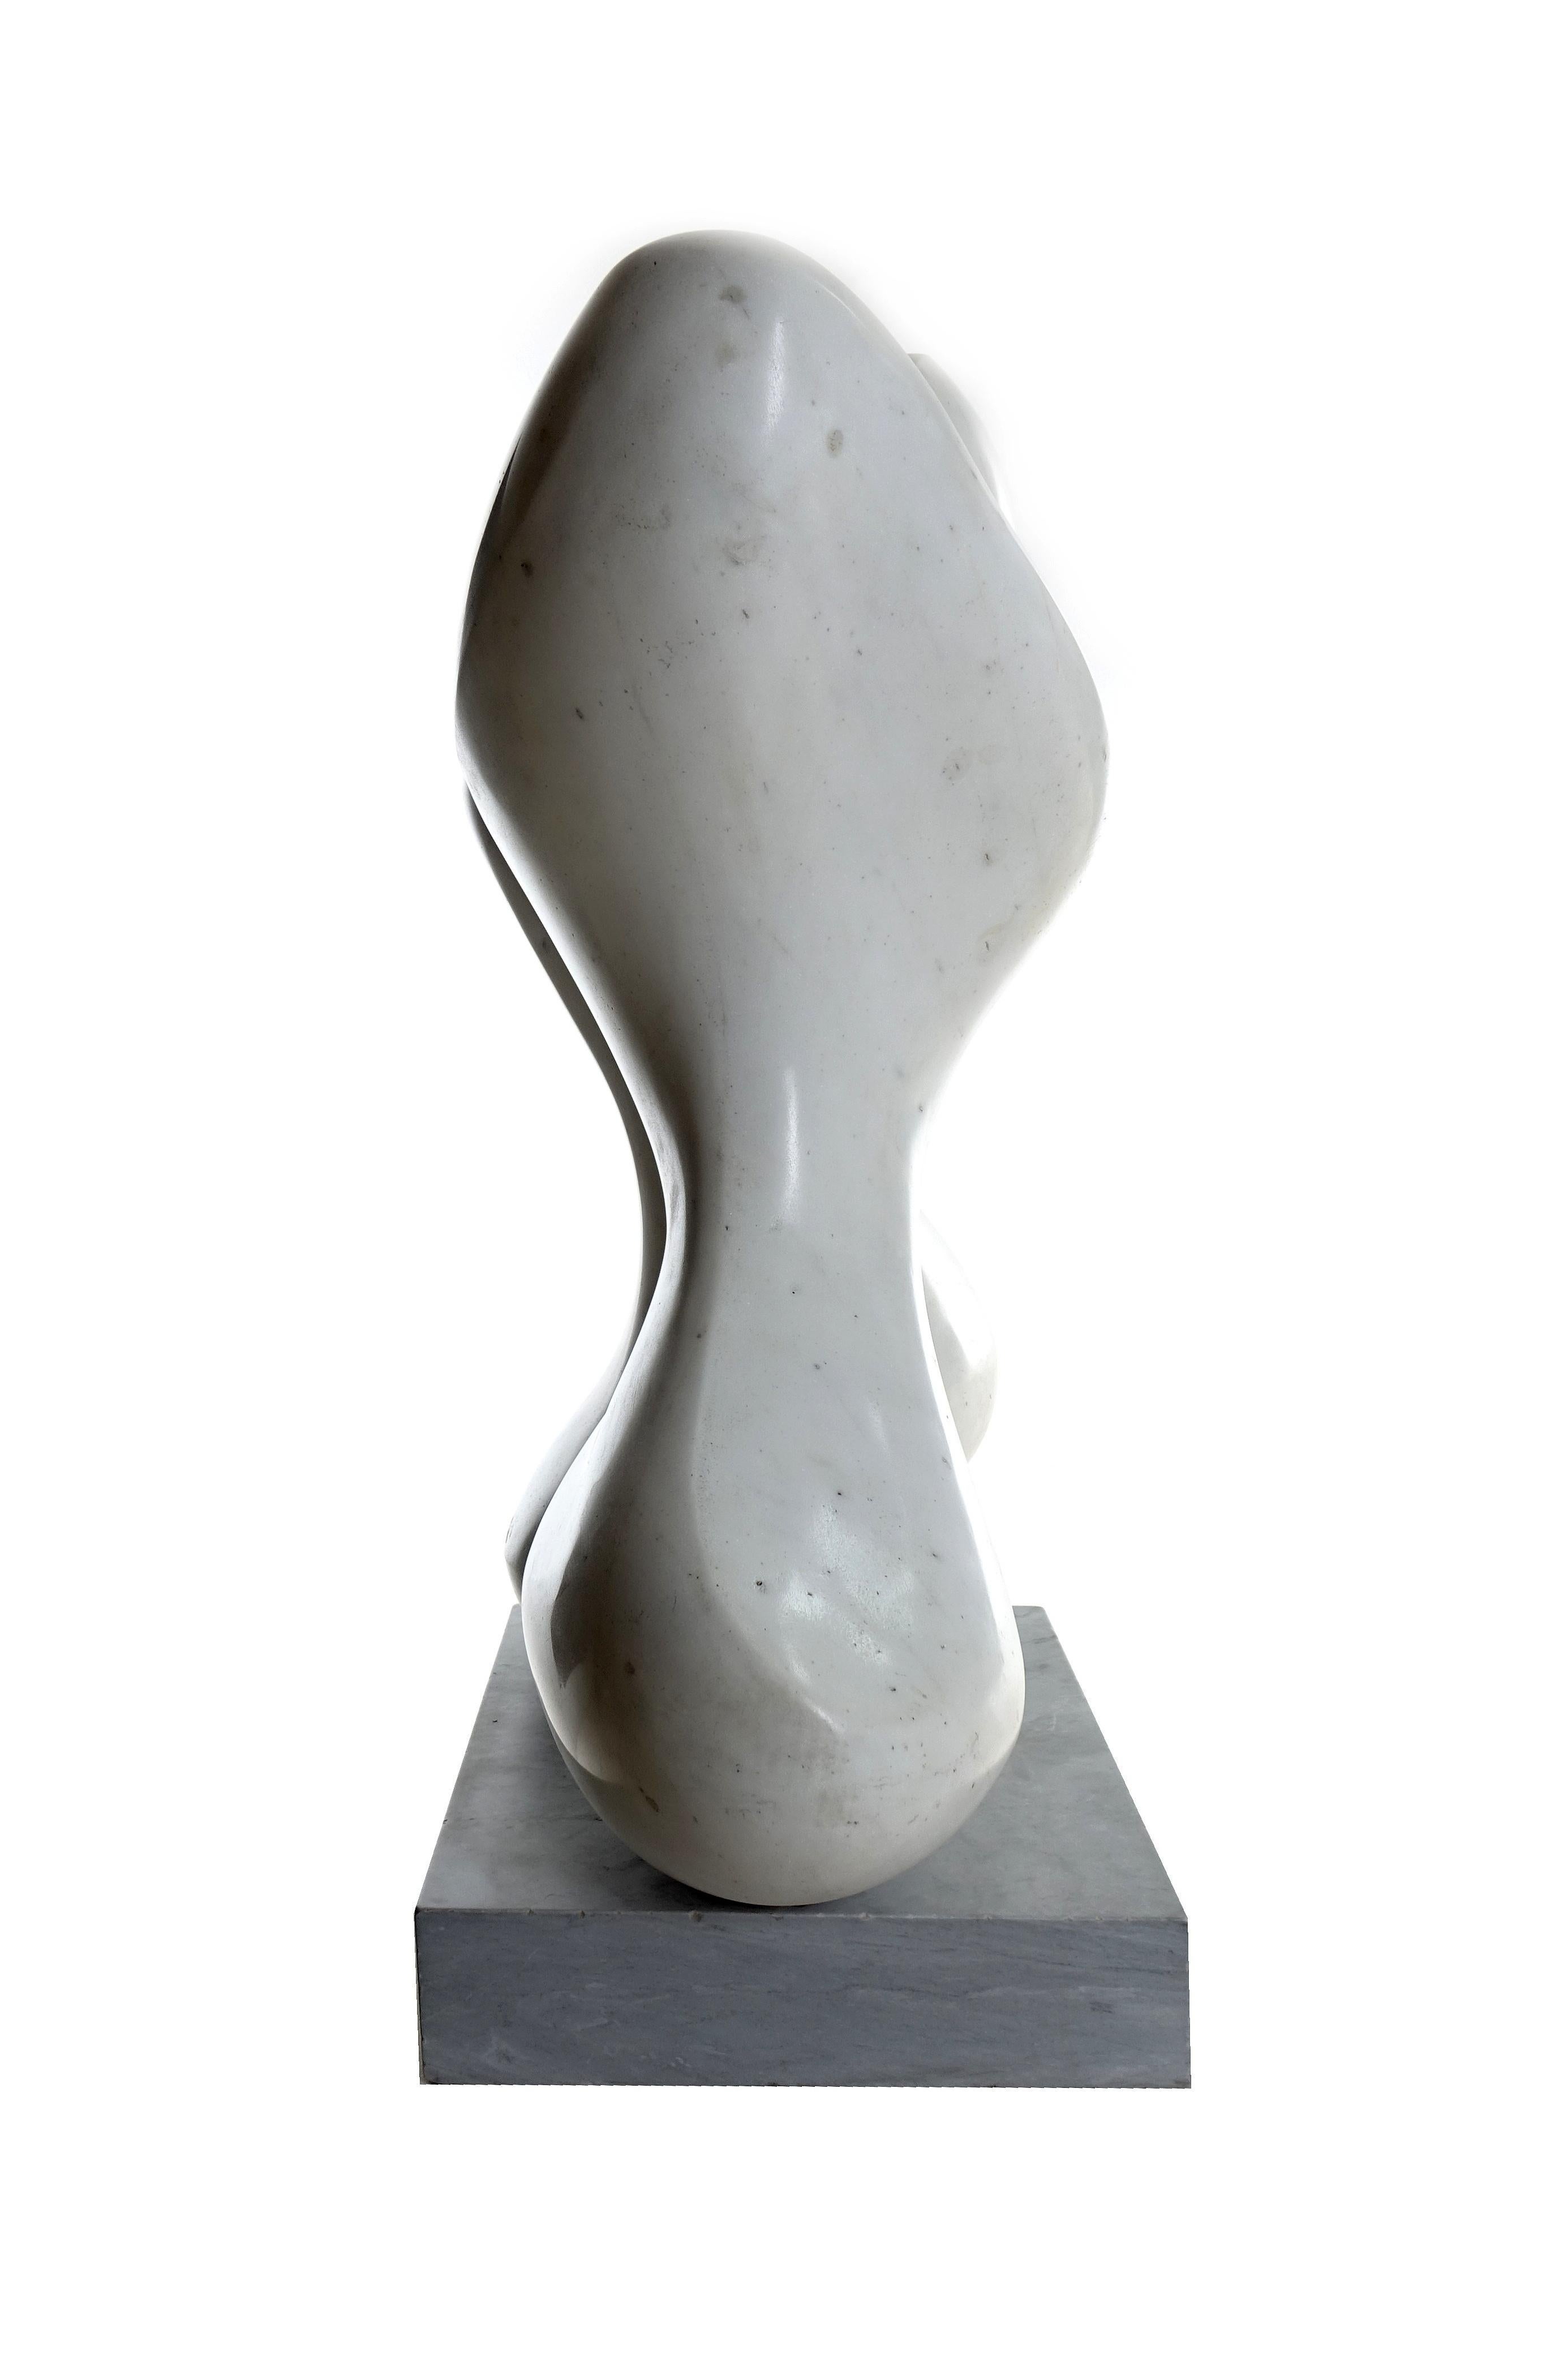 Hand-Carved Salvatore Messina, Carrara Marble Sculpture For Sale